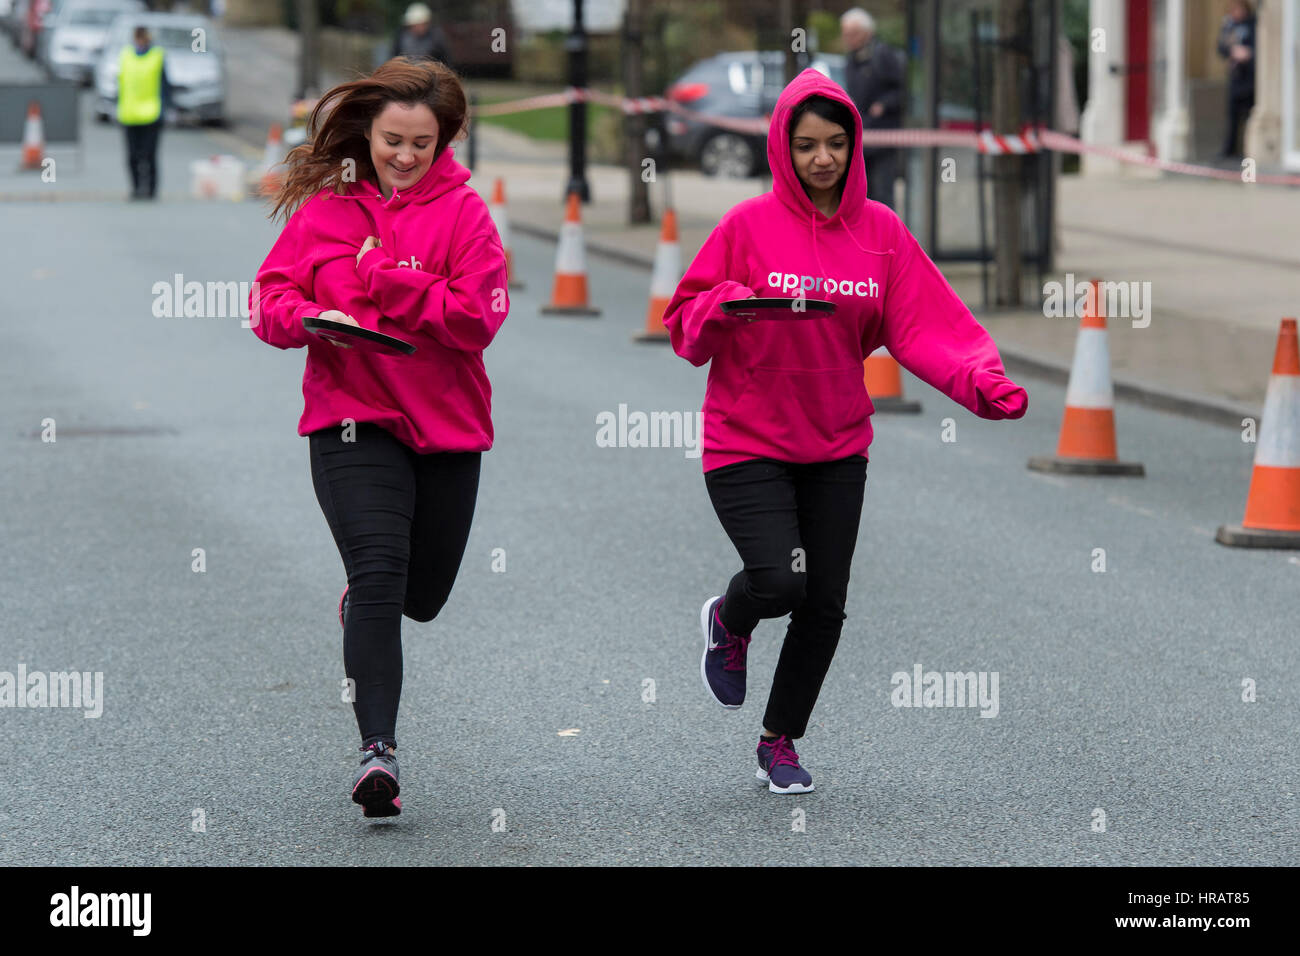 The Grove, Ilkley, West Yorkshire, UK. 28th Feb, 2017. Young female competitors are running and taking part in the traditional, annual Ilkley Rotary Pancake Race. Credit: Ian Lamond/Alamy Live News Stock Photo